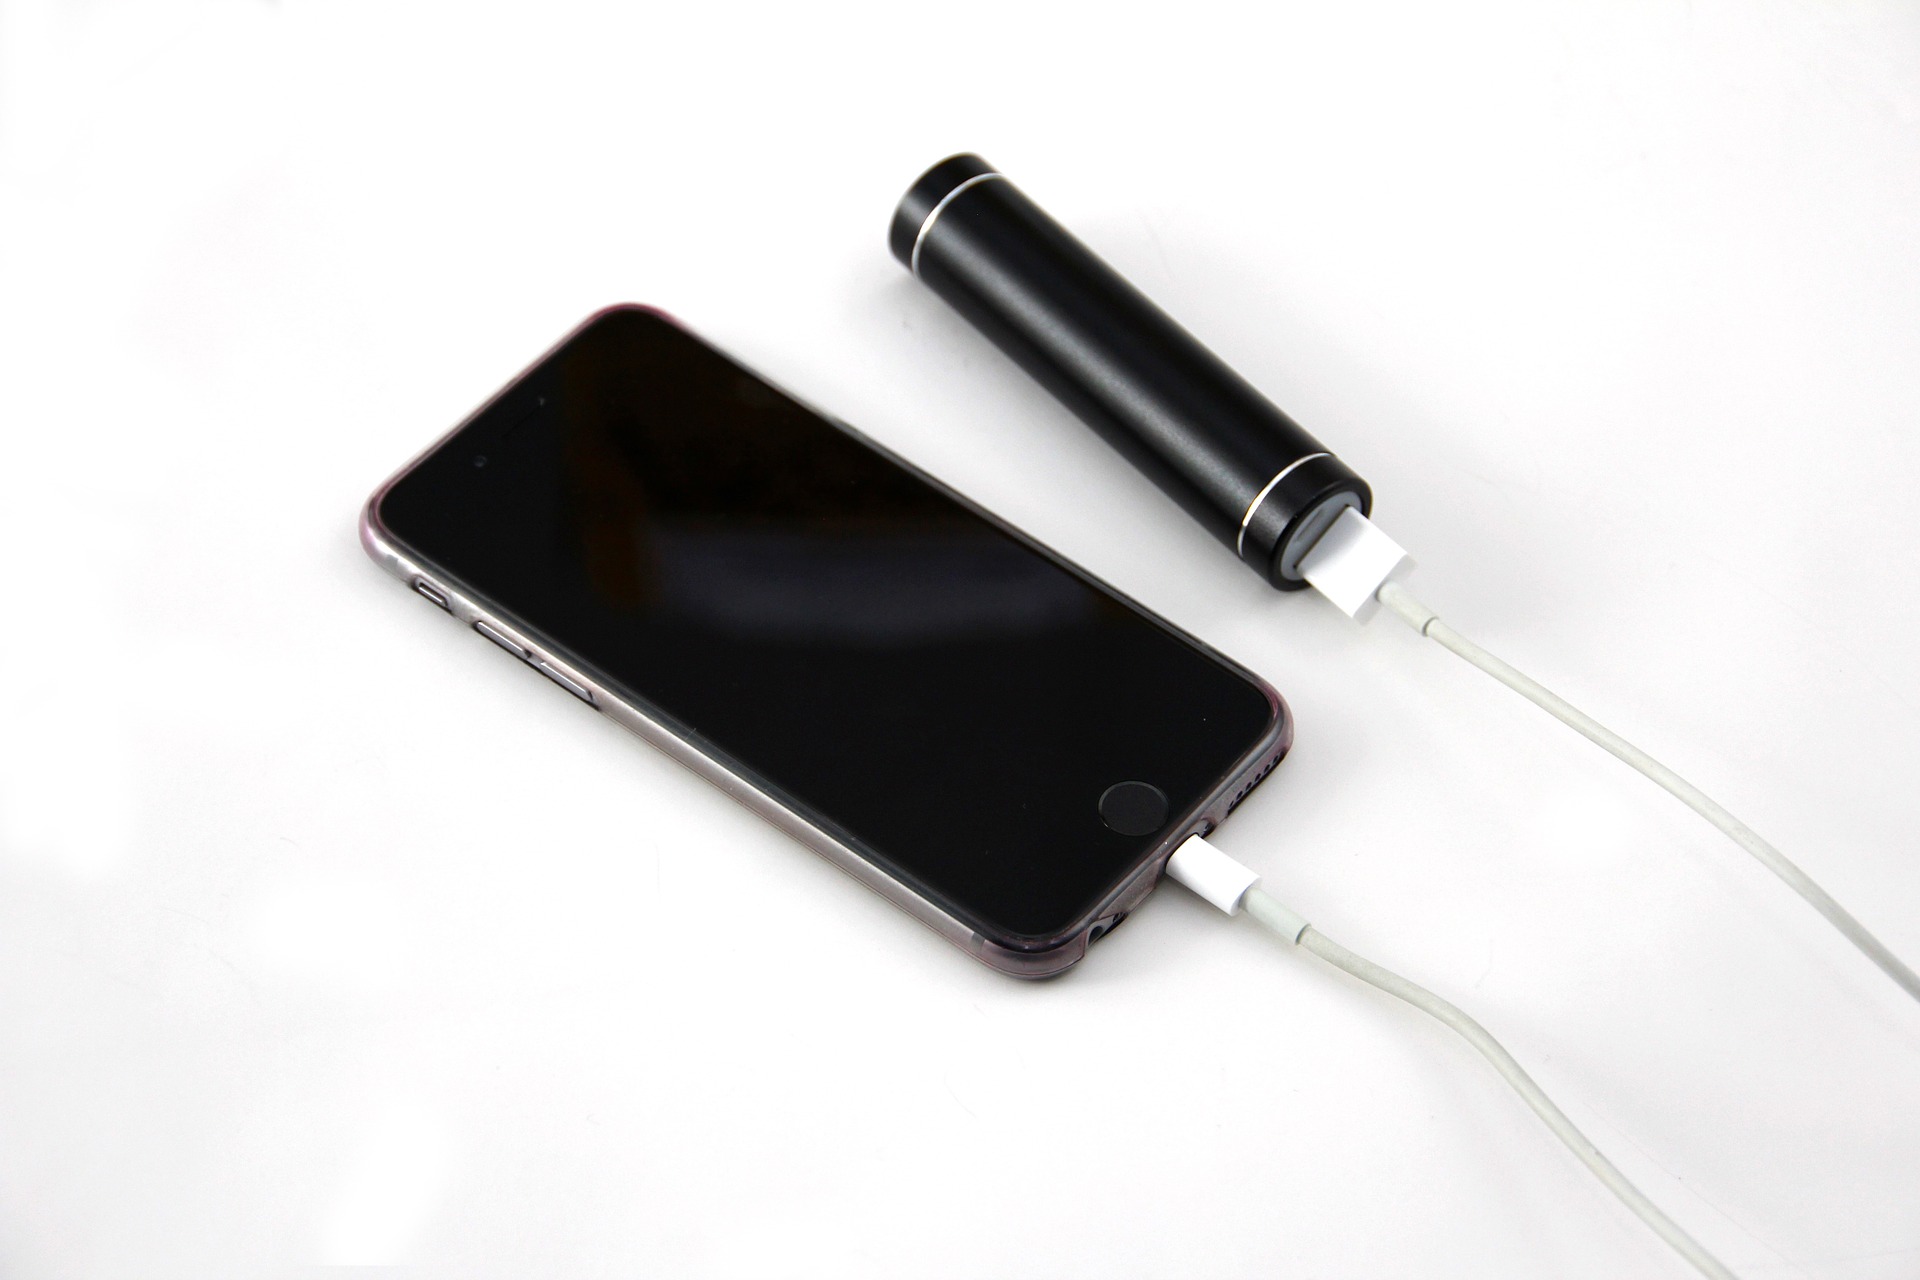 Portable power bank charger and smartphone